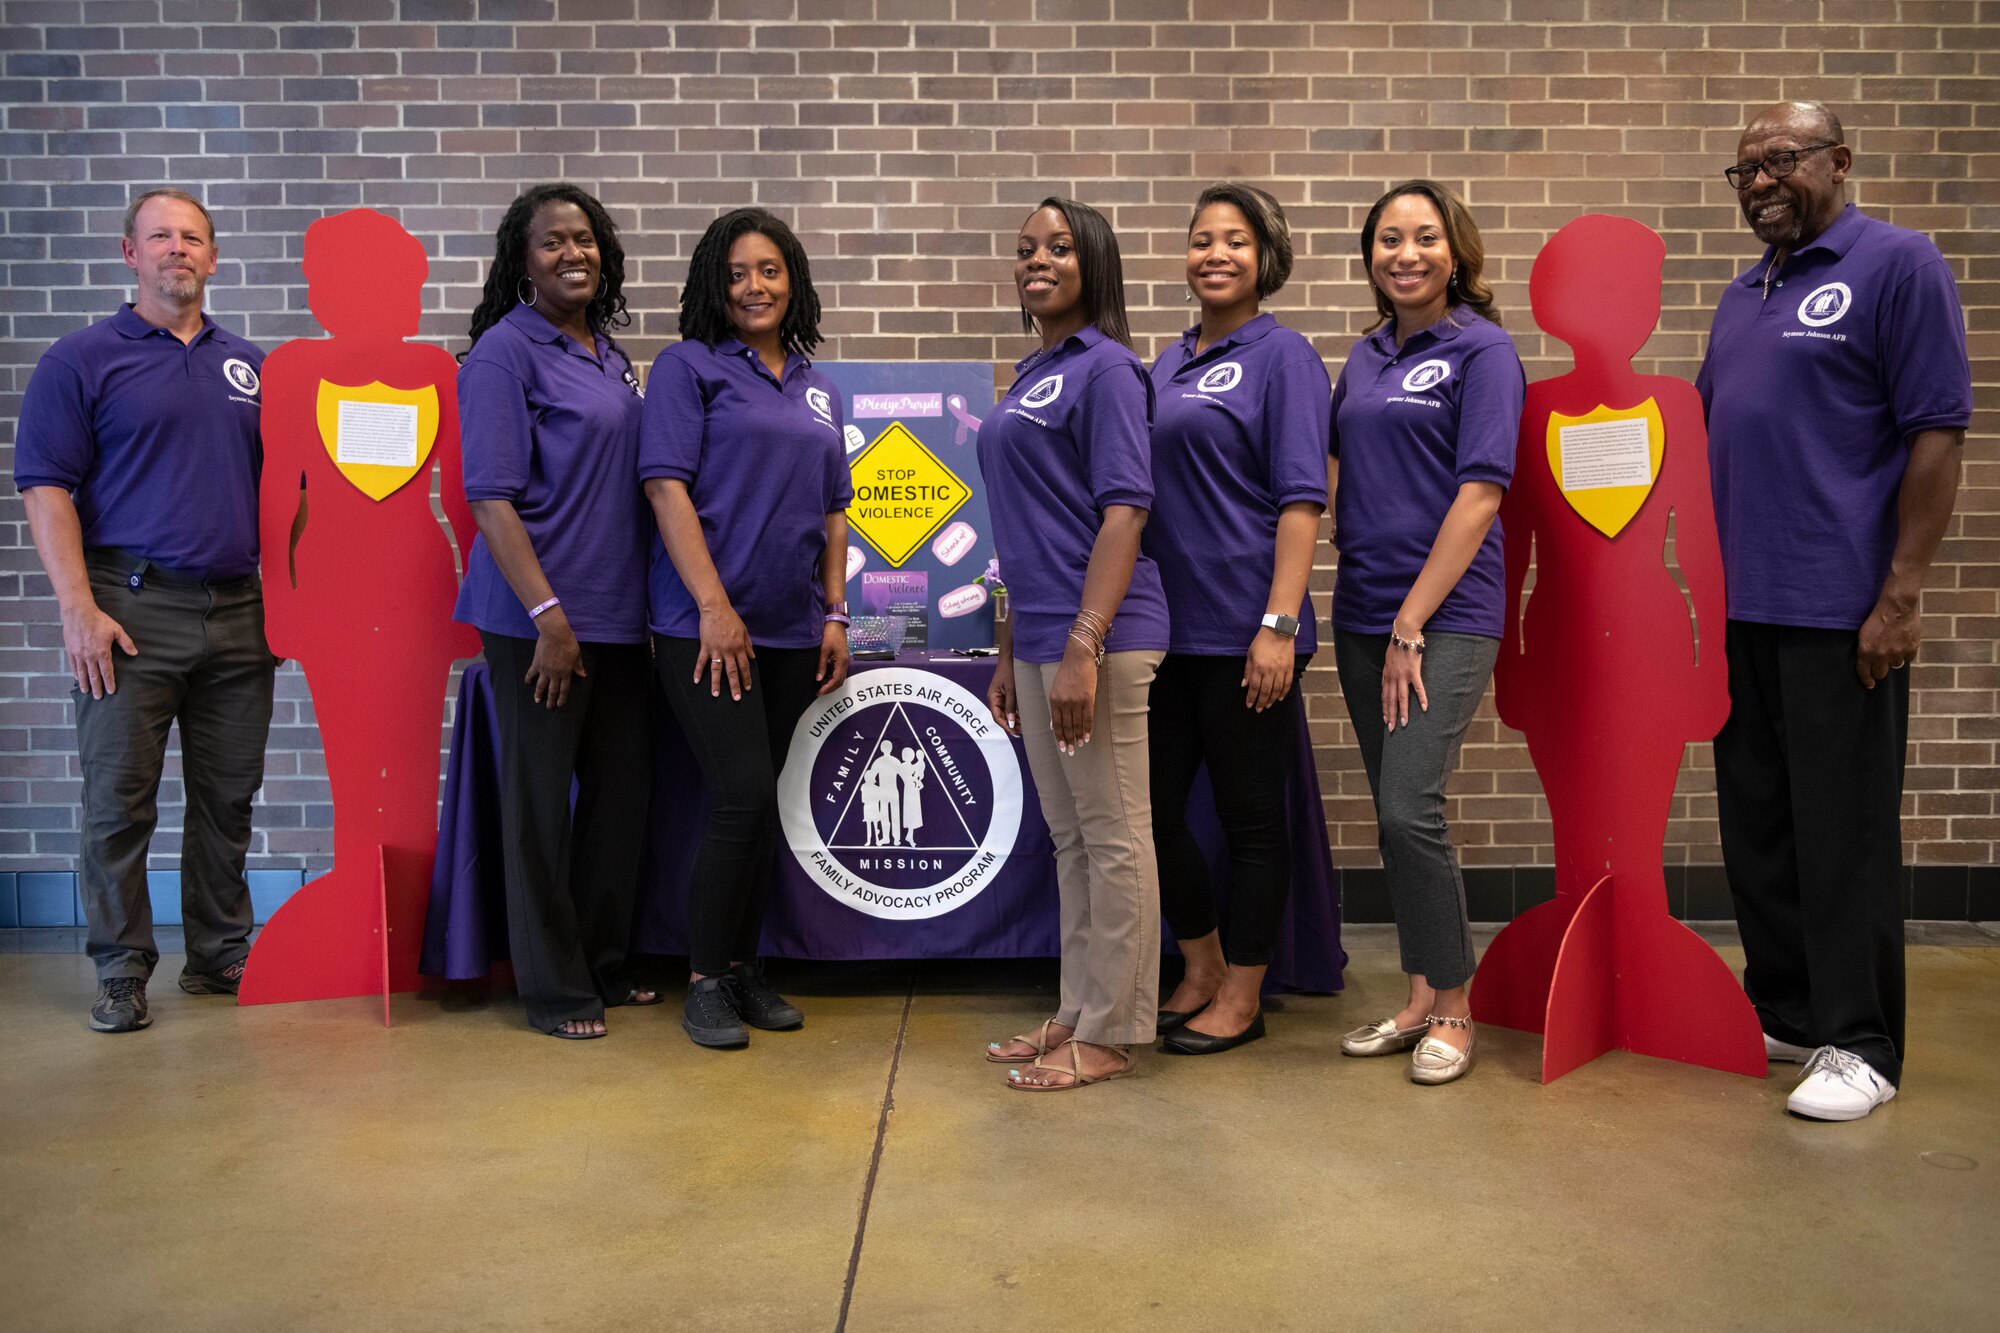 “Because 1 is 2 many”: 4FW kicks off Domestic Violence Awareness Month